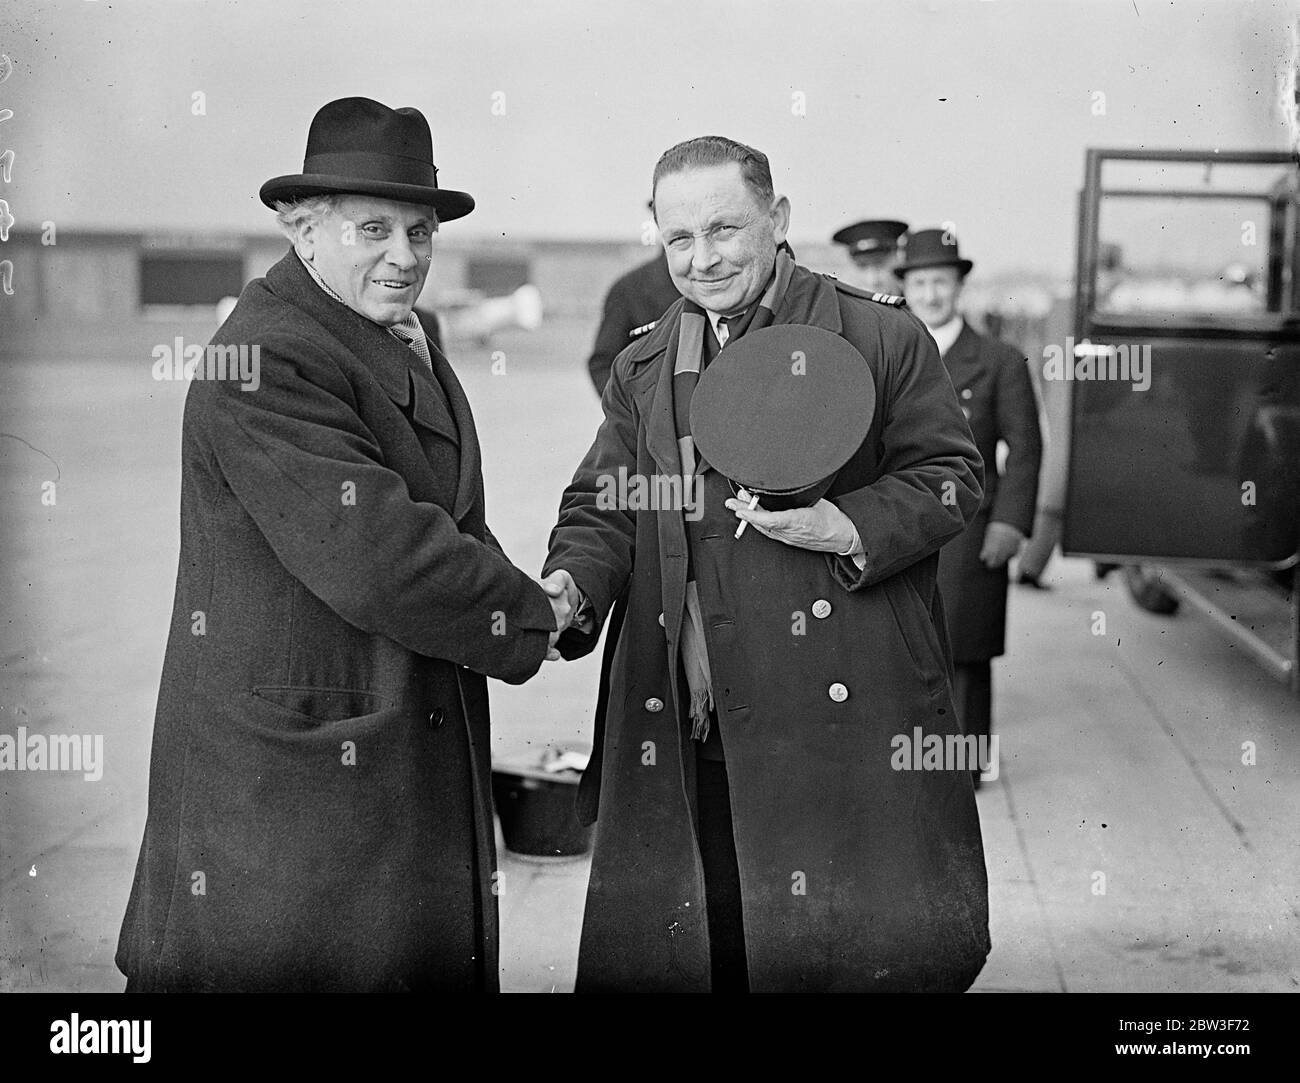 M Paul Boncour arrives at Croydon by air for League Council meeting . M Paul Boncour , French Minister of State , arrived at Croydon by air to attend the meeting of the League Council in St James in St James ' s Palace tomorrow ( Saturday ) when the Rhineland situation will be discussed . Photo shows , M Paul Boncour shaking hands with the pilot after his arrival at Croydon . 13 March 1936 Stock Photo